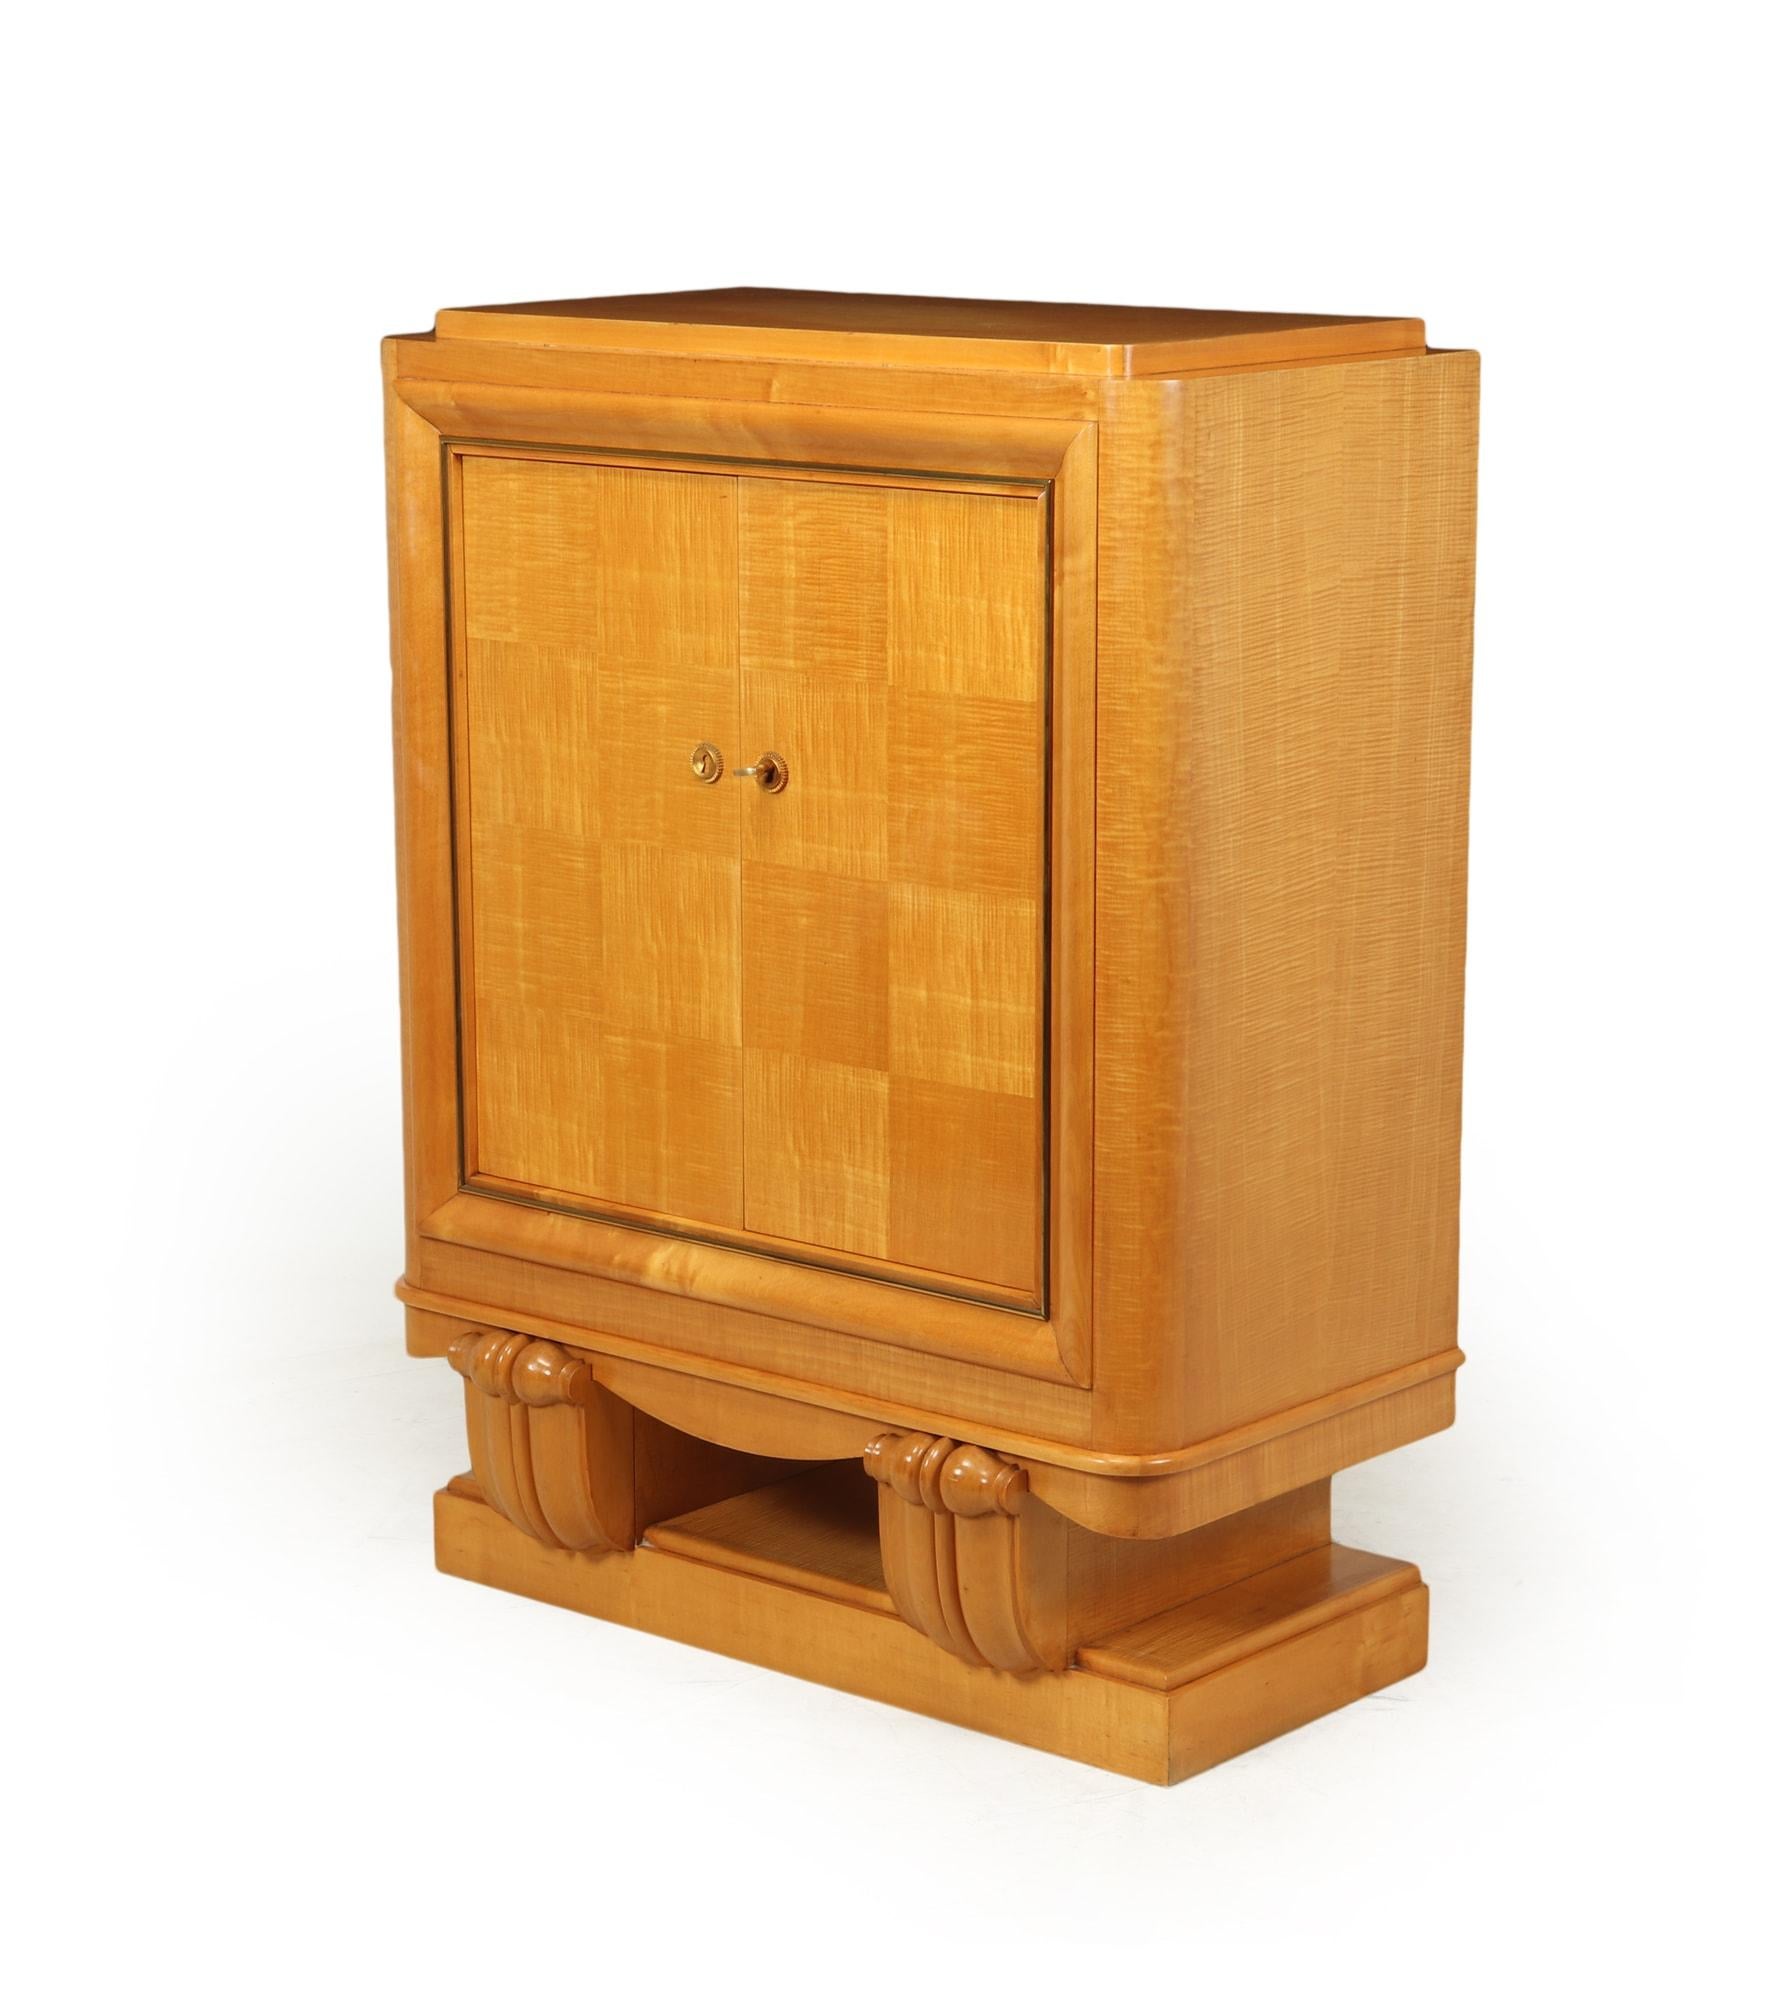 French Art Deco Cocktail Cabinet in Sycamore